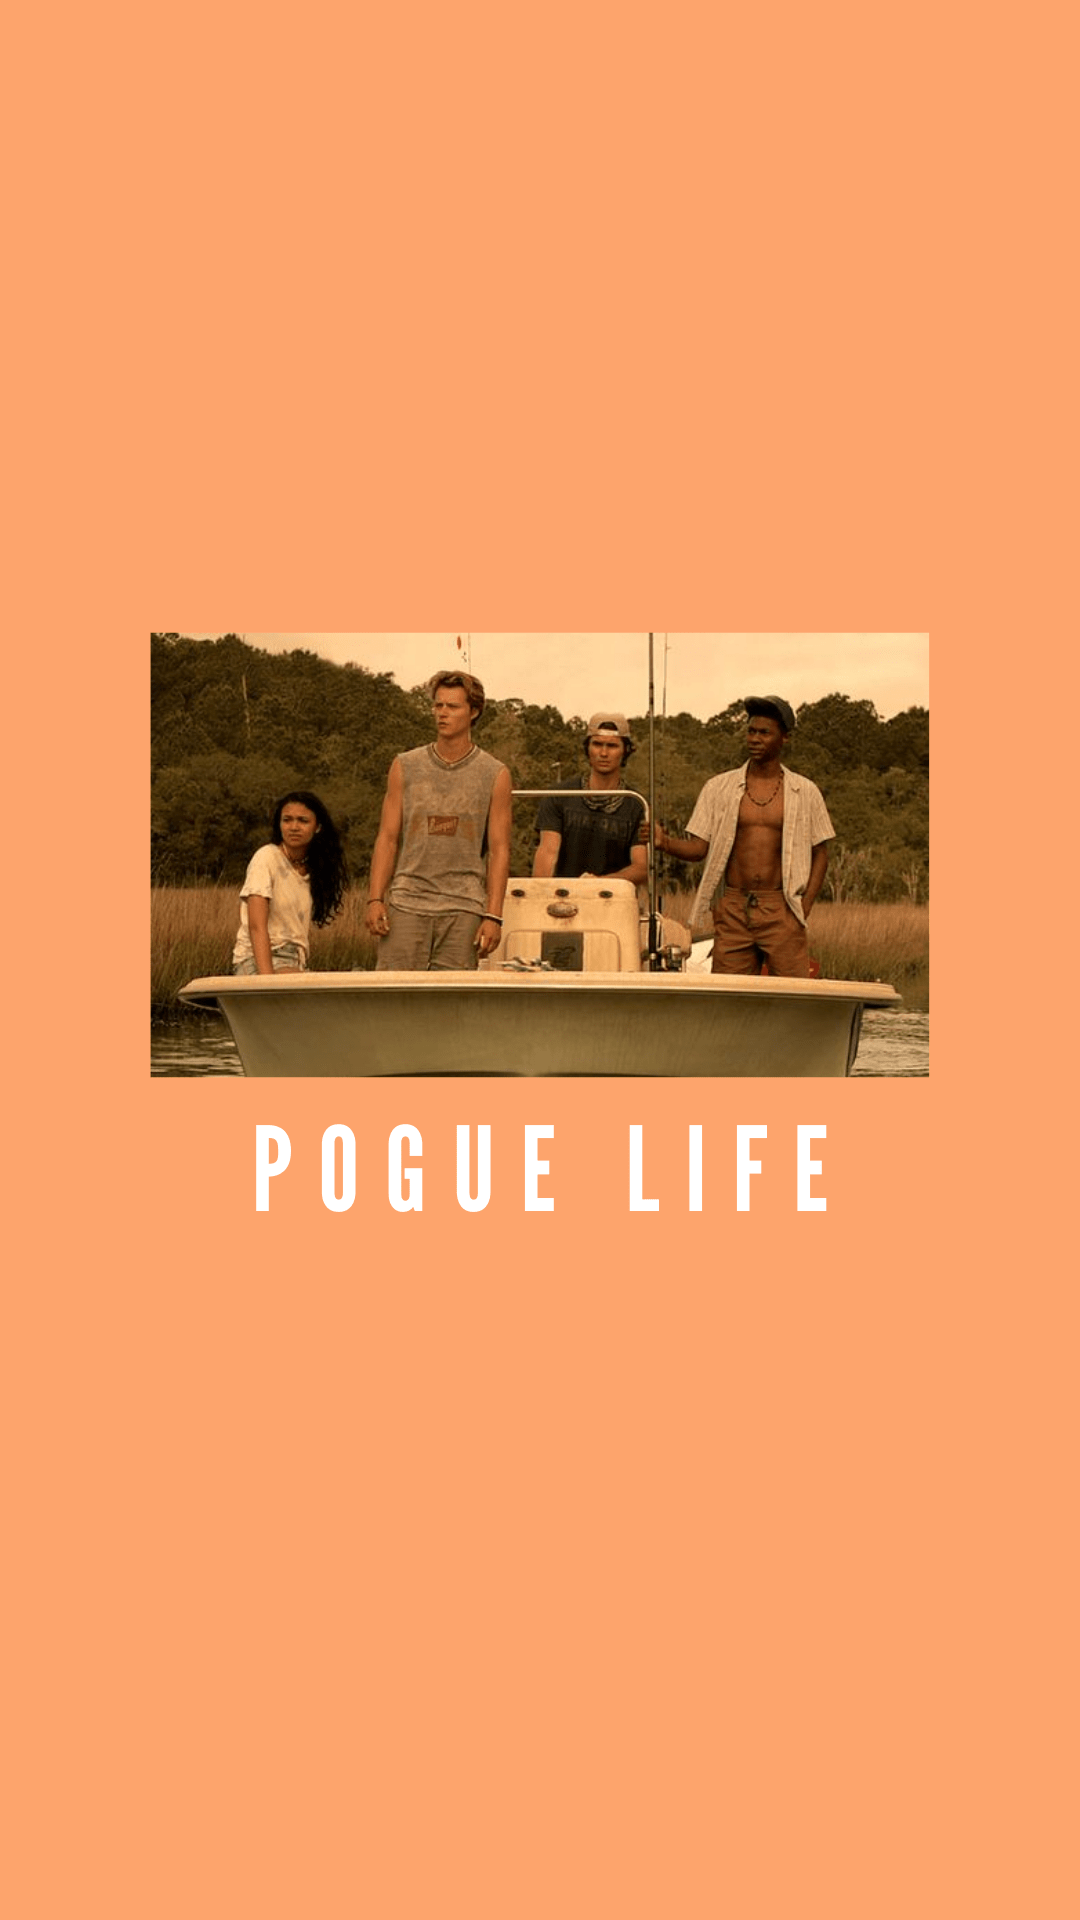 Pogue Life poster featuring four people on a boat - Netflix